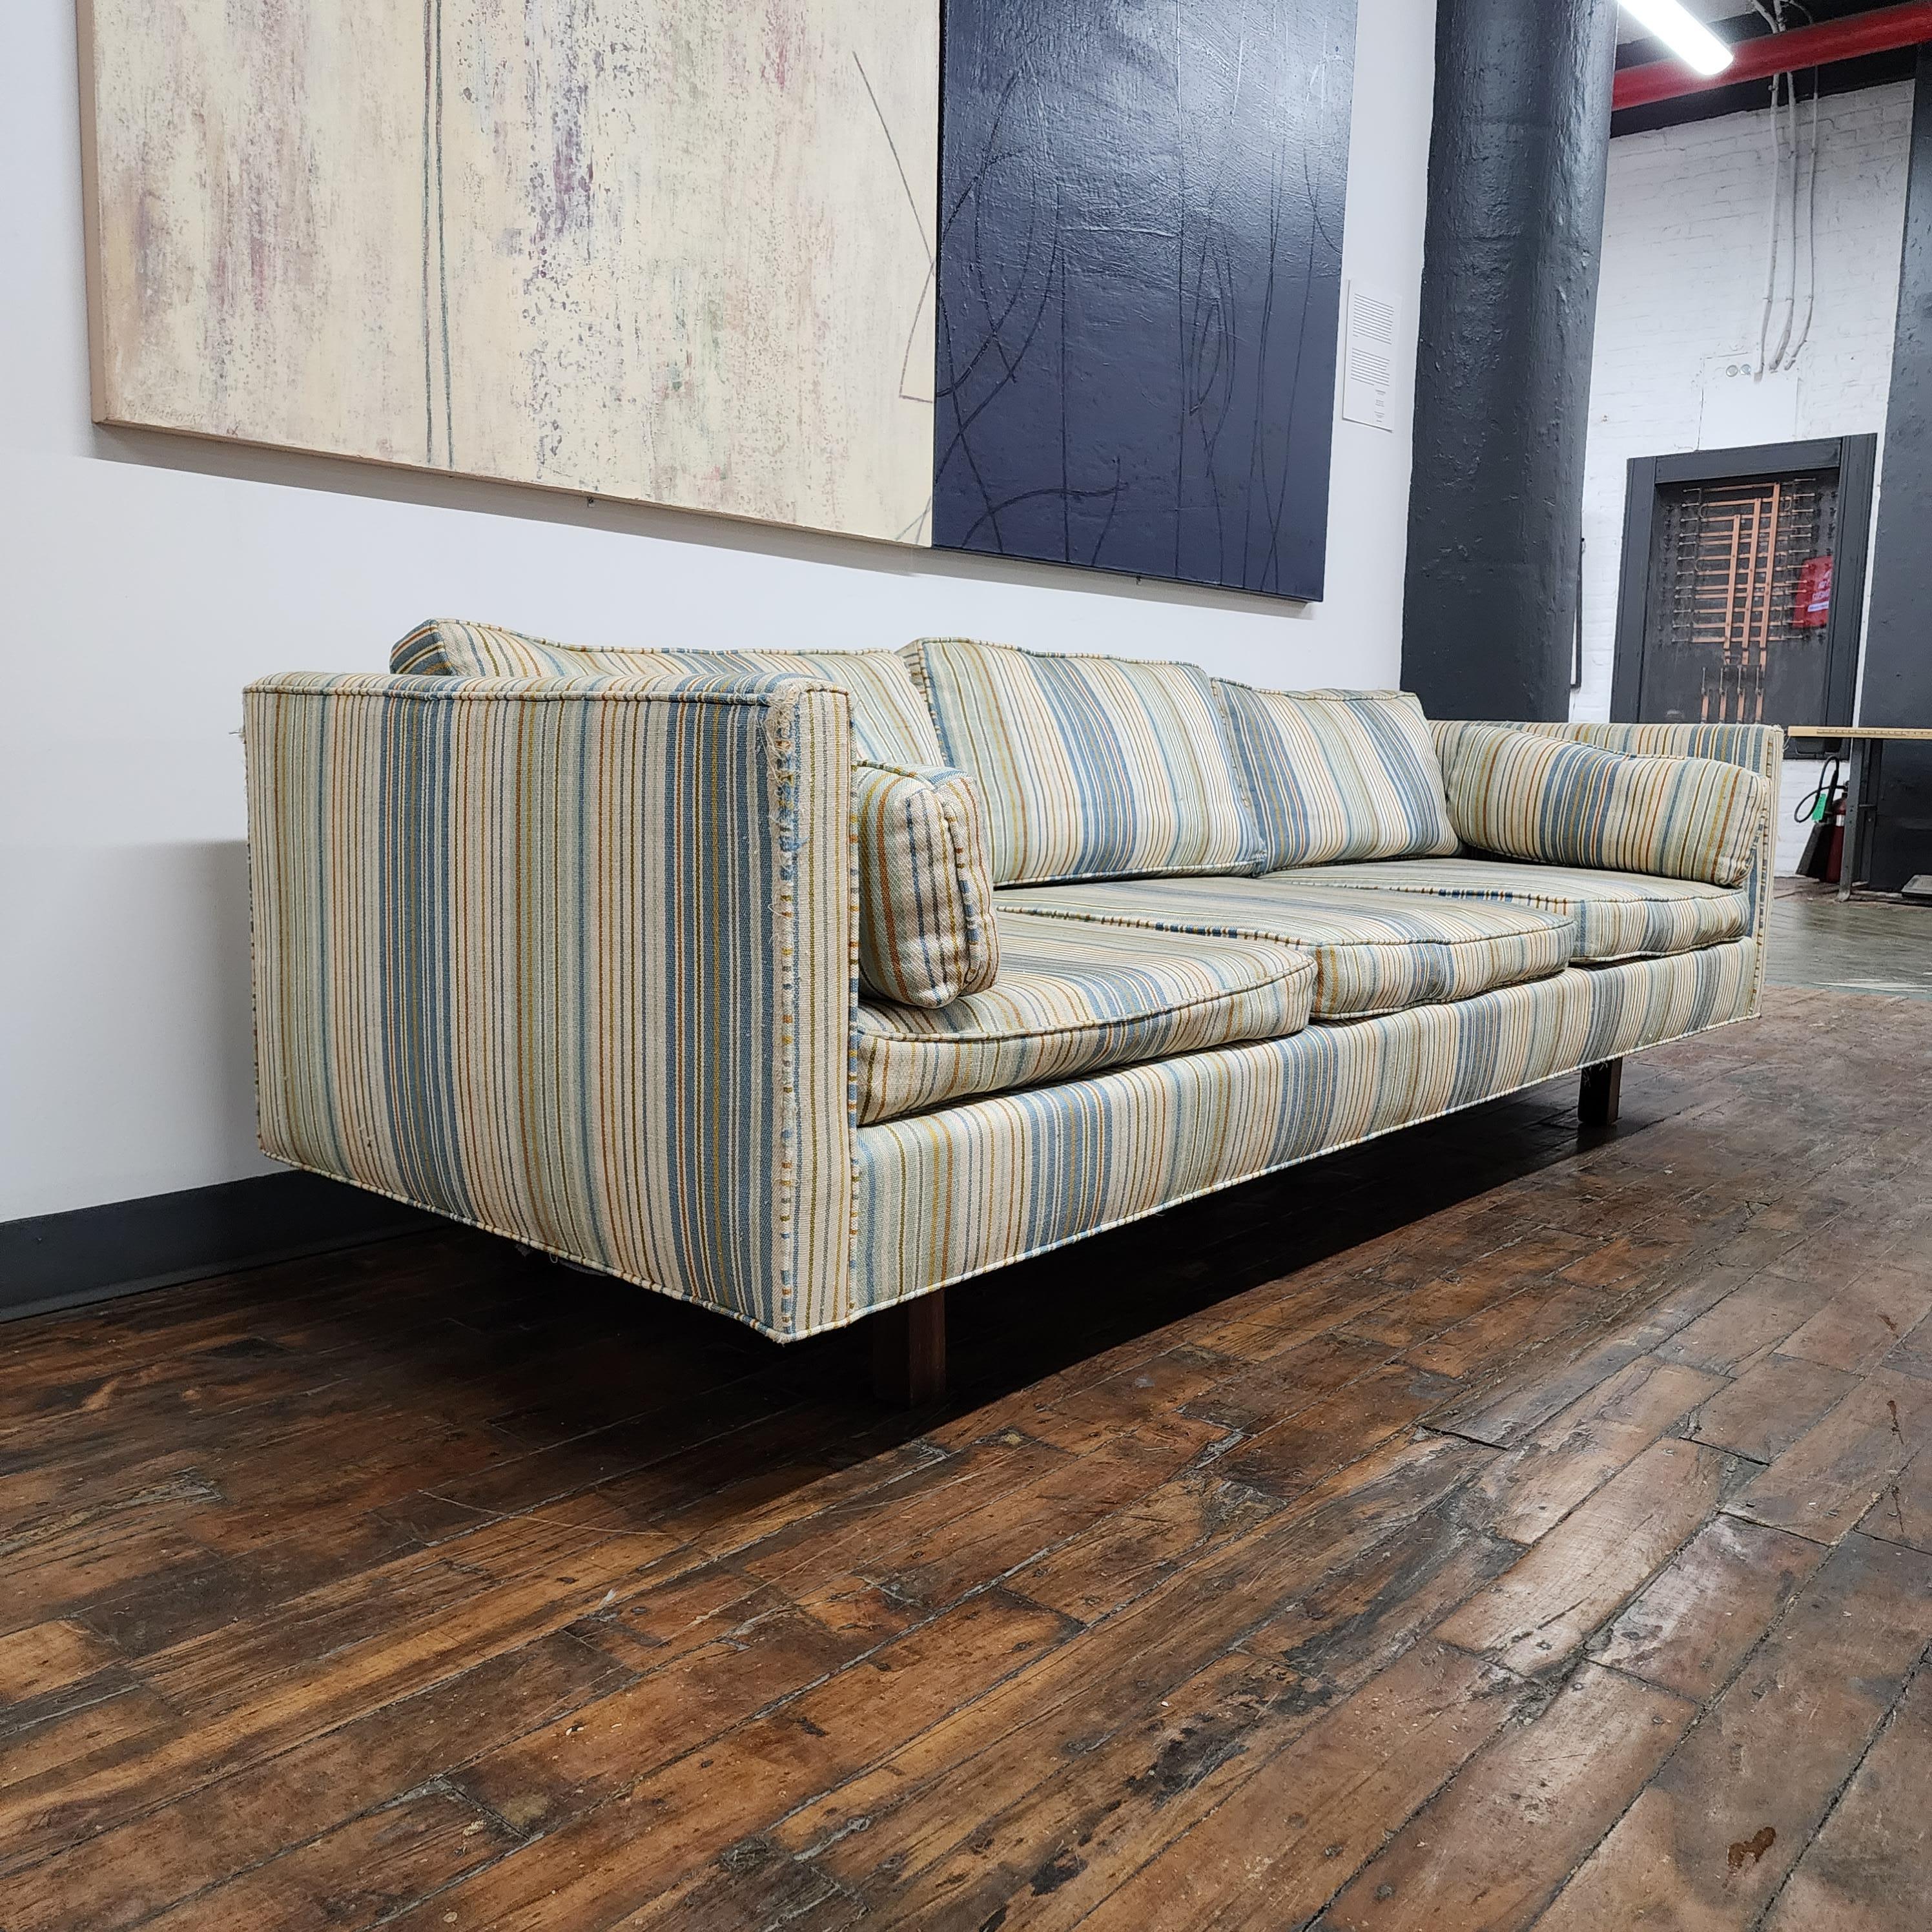 wonderful vintage Milo Baughman style sofa by Martin Industries of Philadelphia Pennsylvania.   this sofa features the original Striped upholstery and walnut legs.